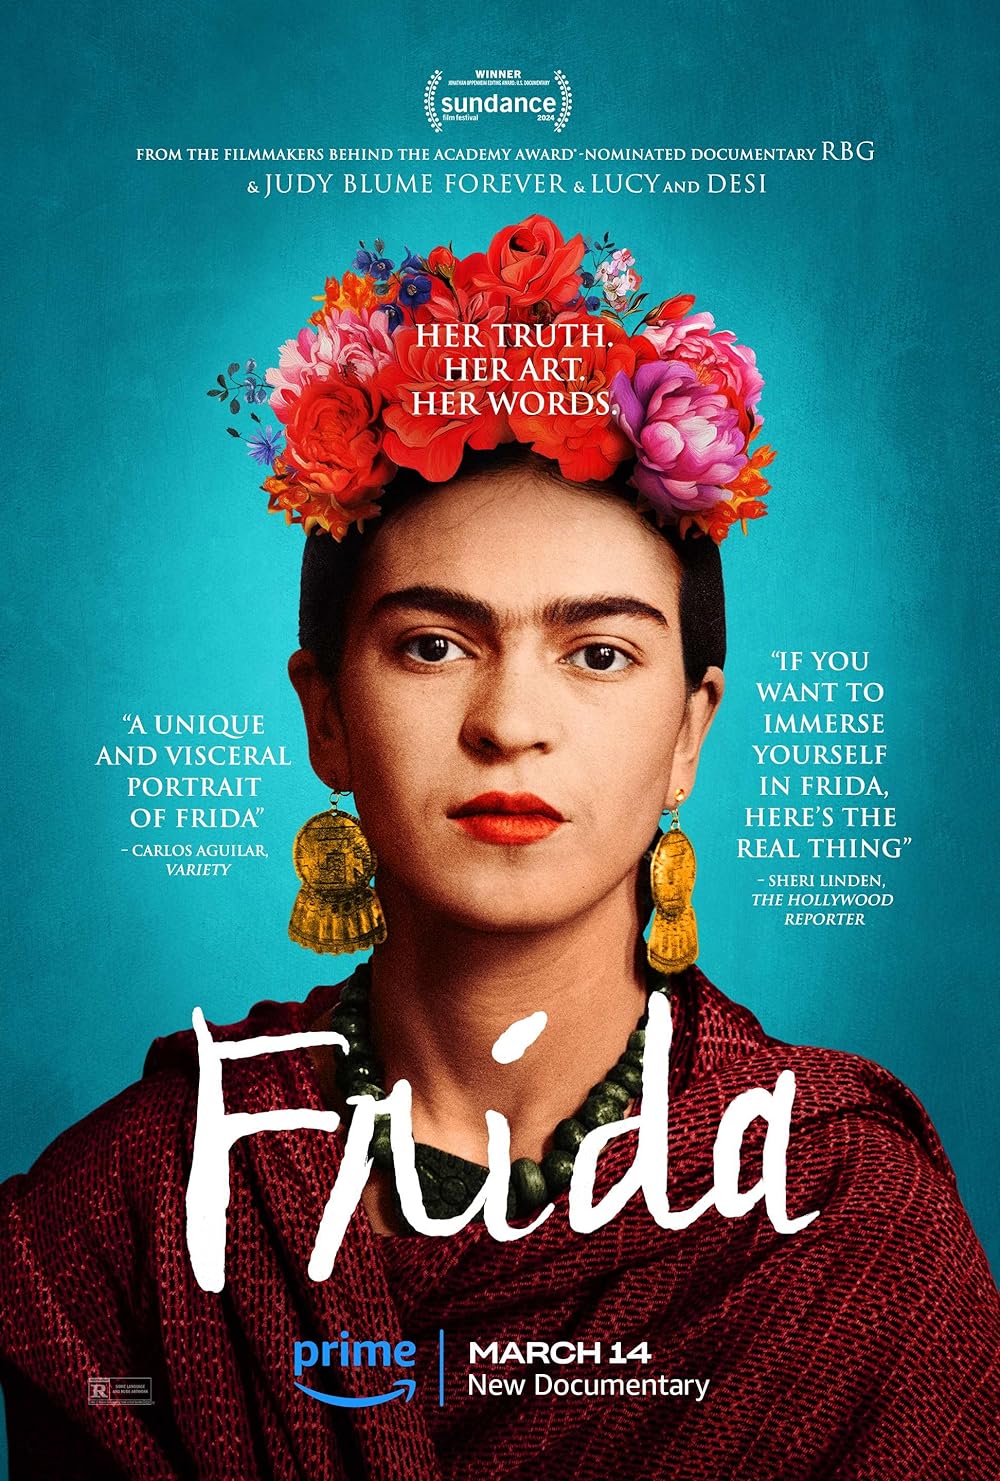 Frida - March 15 - Streaming on Prime VideoFrida is a documentary that offers a deeply personal glimpse into the life of the iconic artist Frida Kahlo, narrated through her own words from diaries, letters, essays, and interviews. The film aims to provide an intimate portrait of Kahlo’s life, thoughts, and emotions enriched with vivid, lyrical animation inspired by her unforgettable artwork, promising a unique exploration of her legacy and influence.